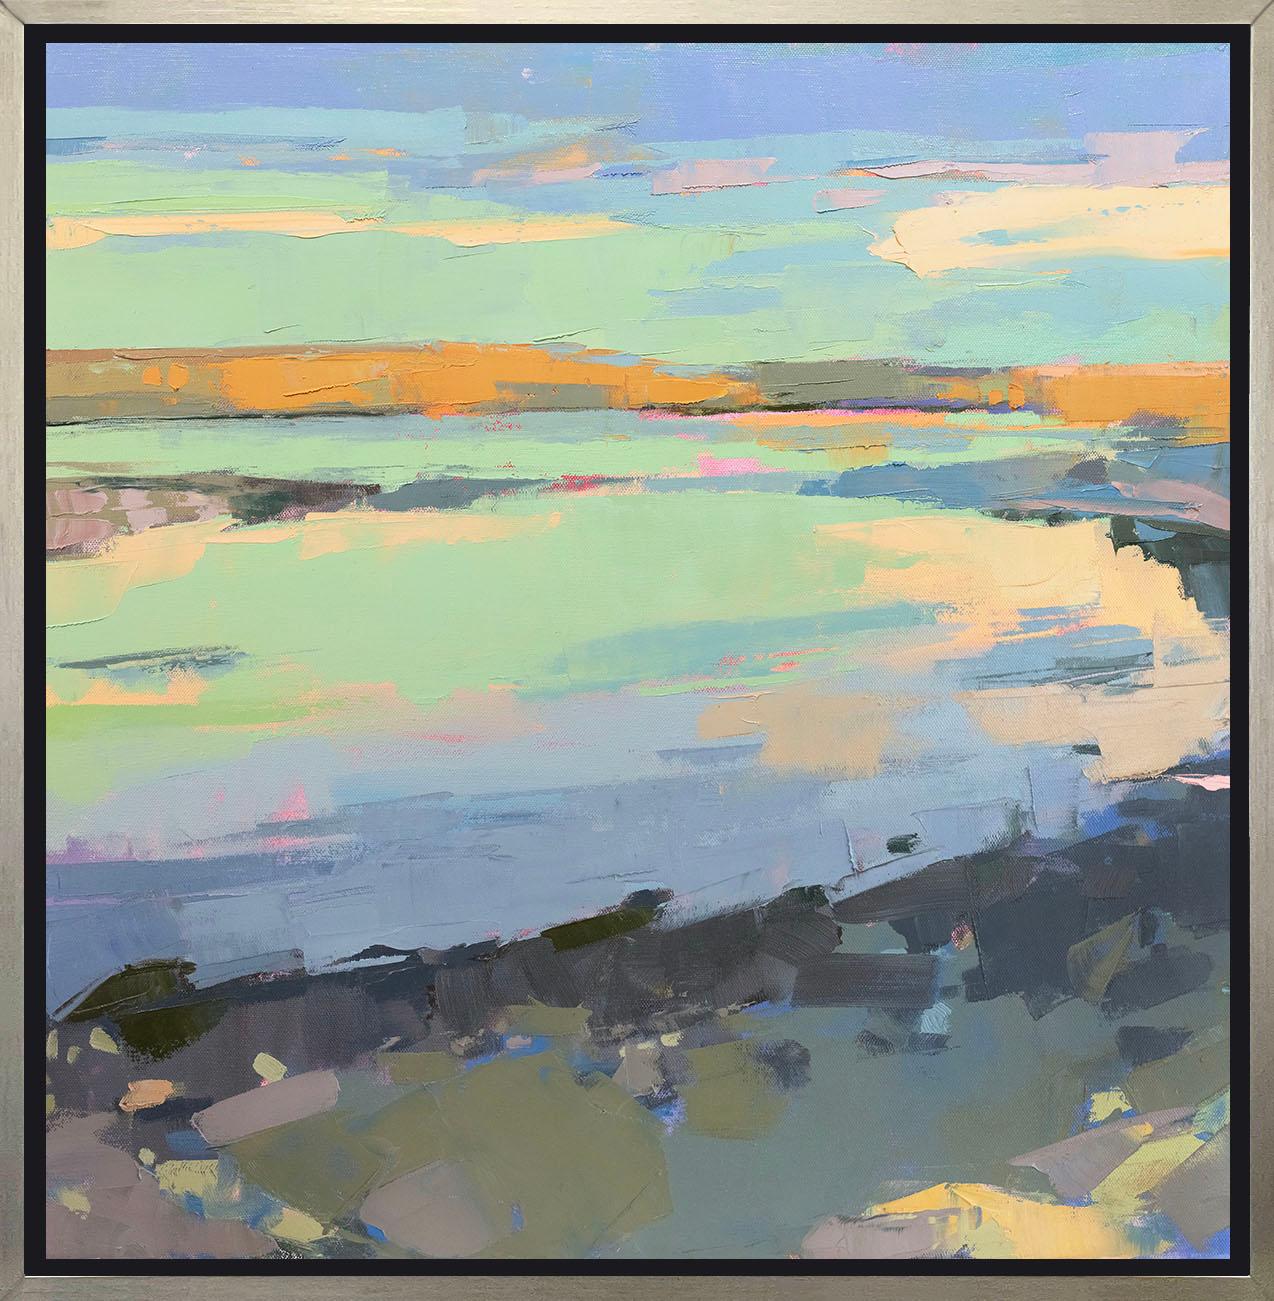 This Limited Edition giclee landscape print by Bri Custer is an edition size of 195. It features a light green, blue, and mint green palette. Printed on canvas, this giclee ships framed in a warm silver floater frame wired and ready to hang. Other